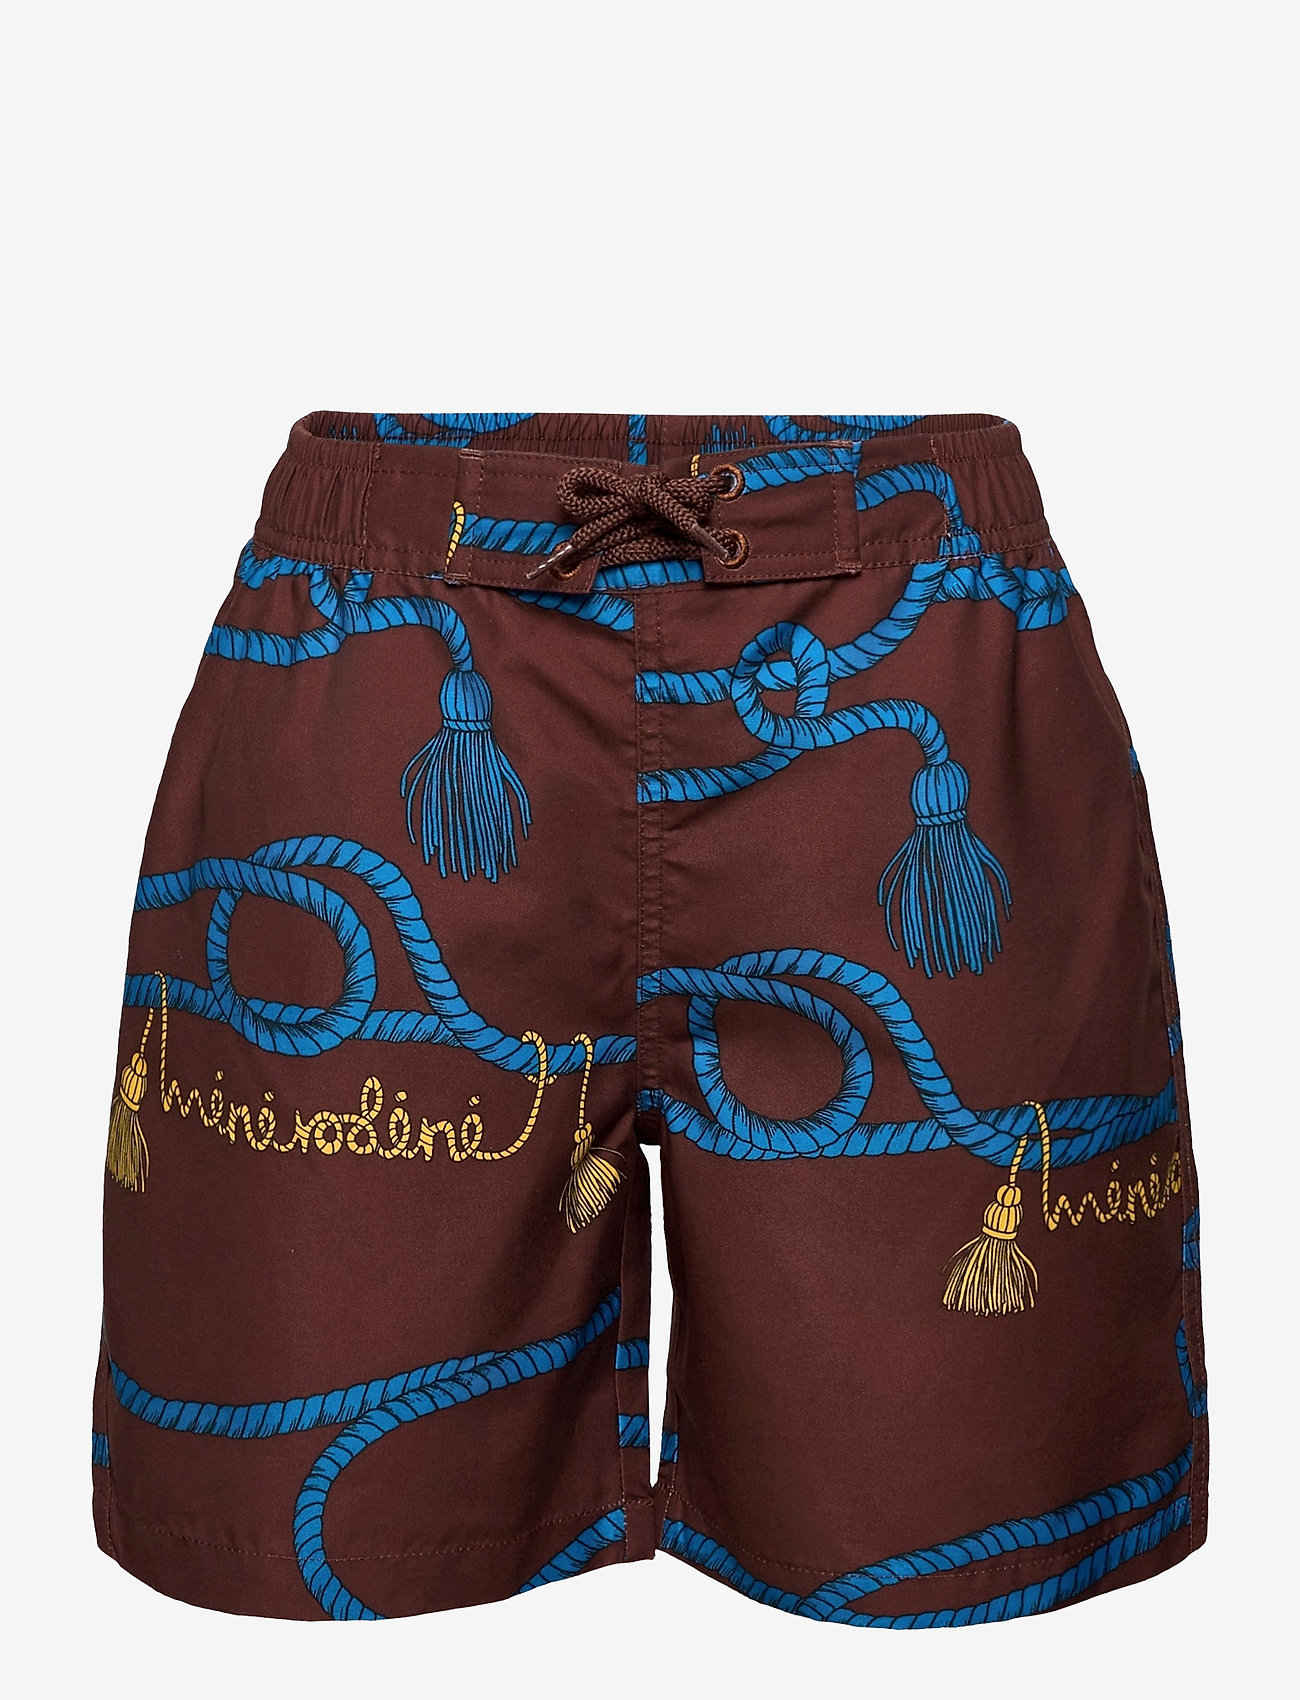 Mini Rodini - Rope swimshorts - sommerschnäppchen - brown - 0